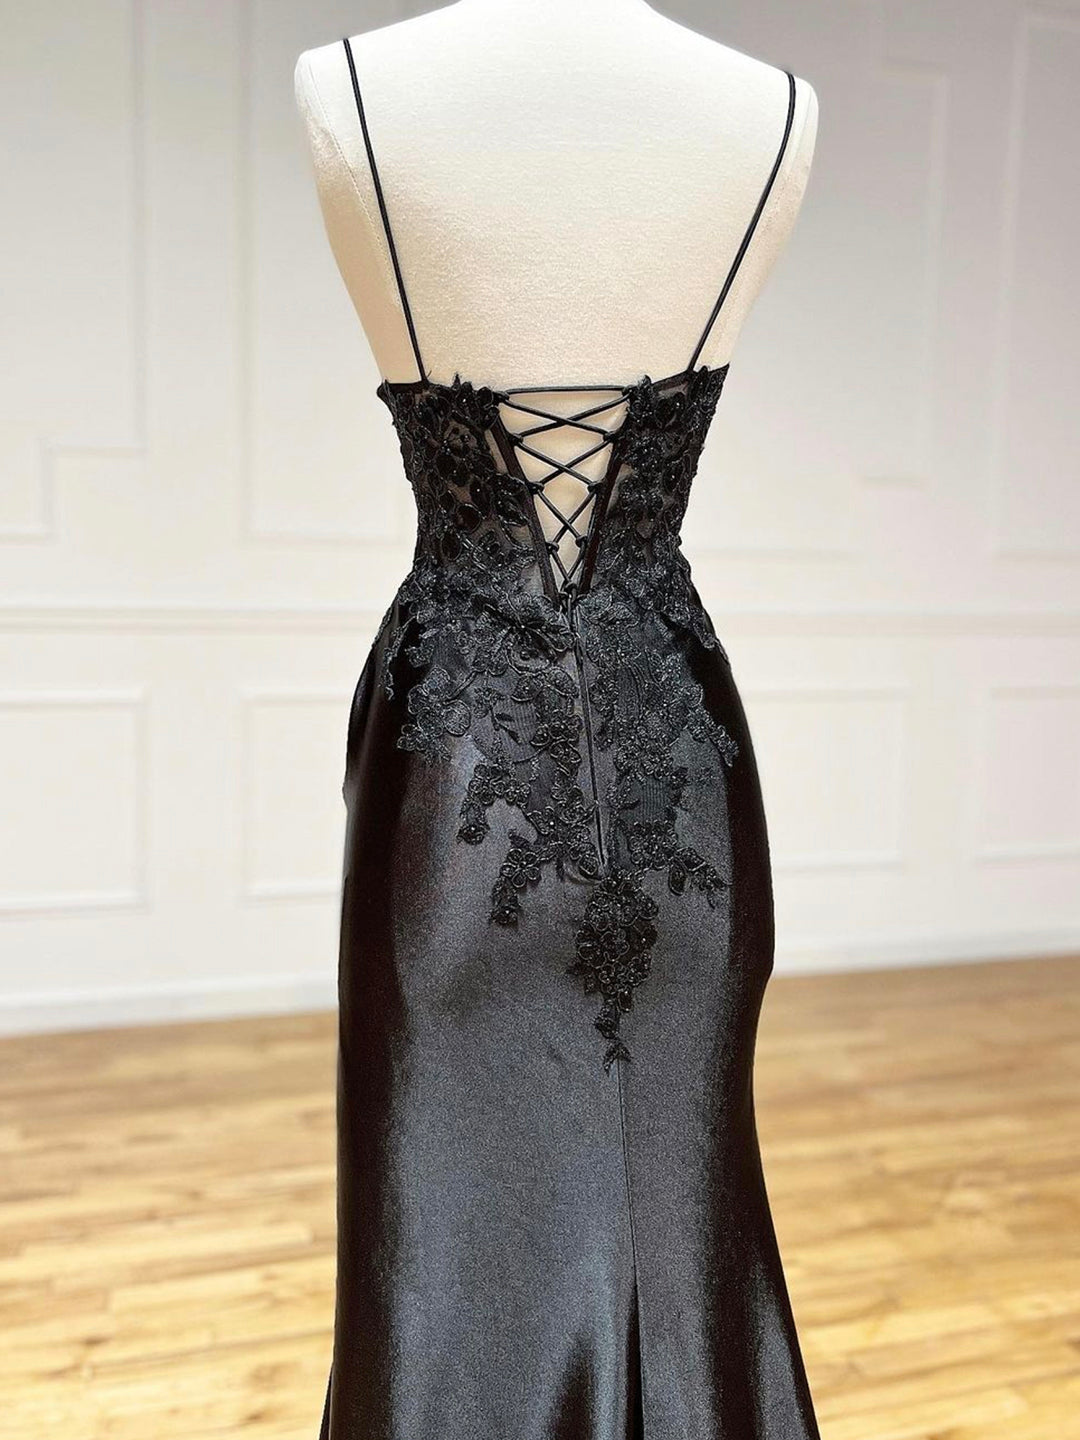 Homecomming Dresses With Sleeves, Black V-Neck Satin Lace Long Prom Dress, Black Spaghetti Strap Evening Dress with Slit